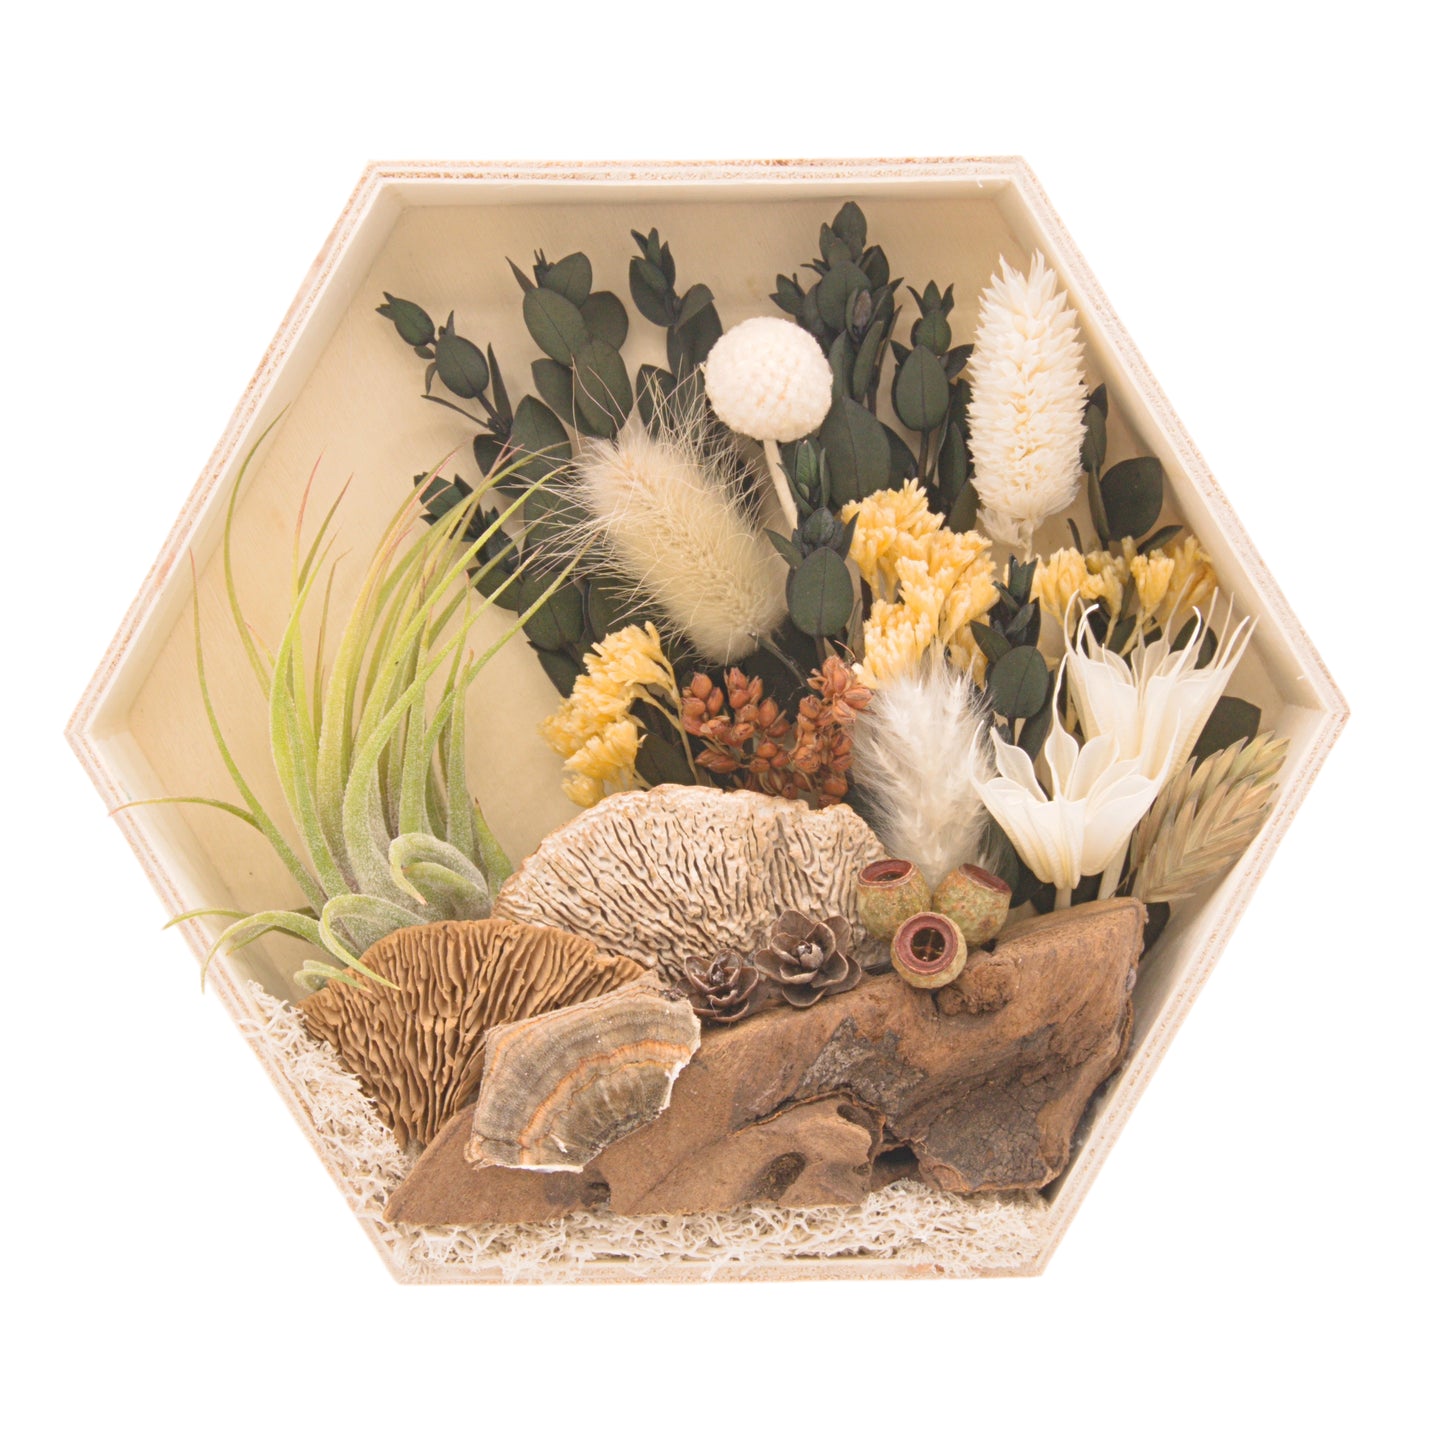 Wooden hexagon box frame filled with dried flowers, moss, wood and an airplant/tillandsia